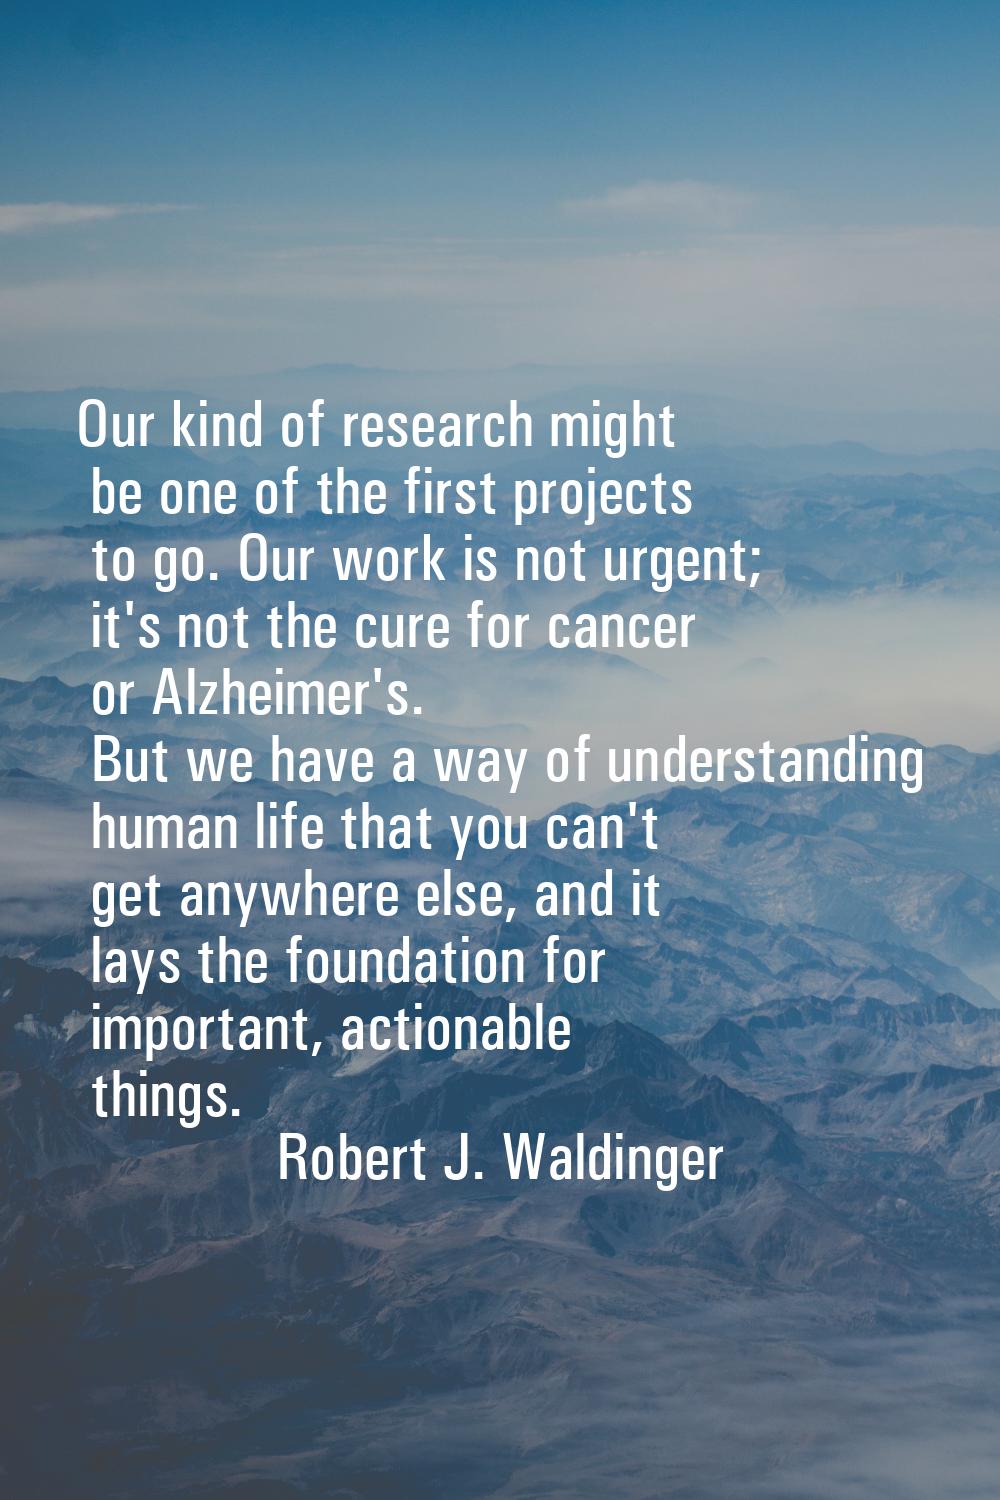 Our kind of research might be one of the first projects to go. Our work is not urgent; it's not the